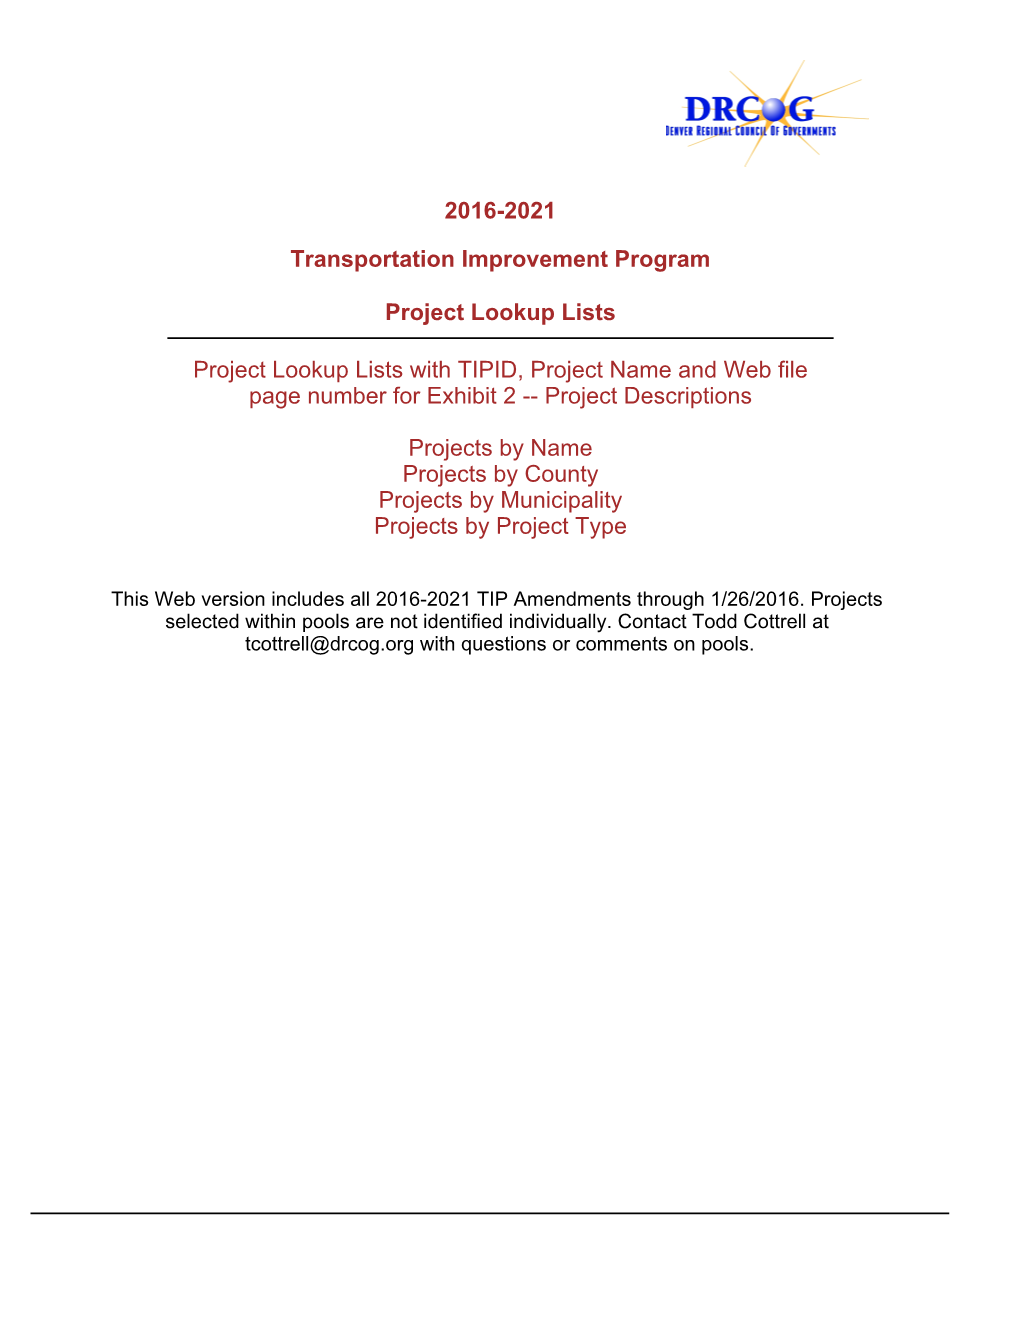 2016-2021 Transportation Improvement Program Project List TIPID Project Name 2016-028 16Th St Mall Reconstruction: Arapahoe St to Lawrence St 2016-018 23Rd Ave